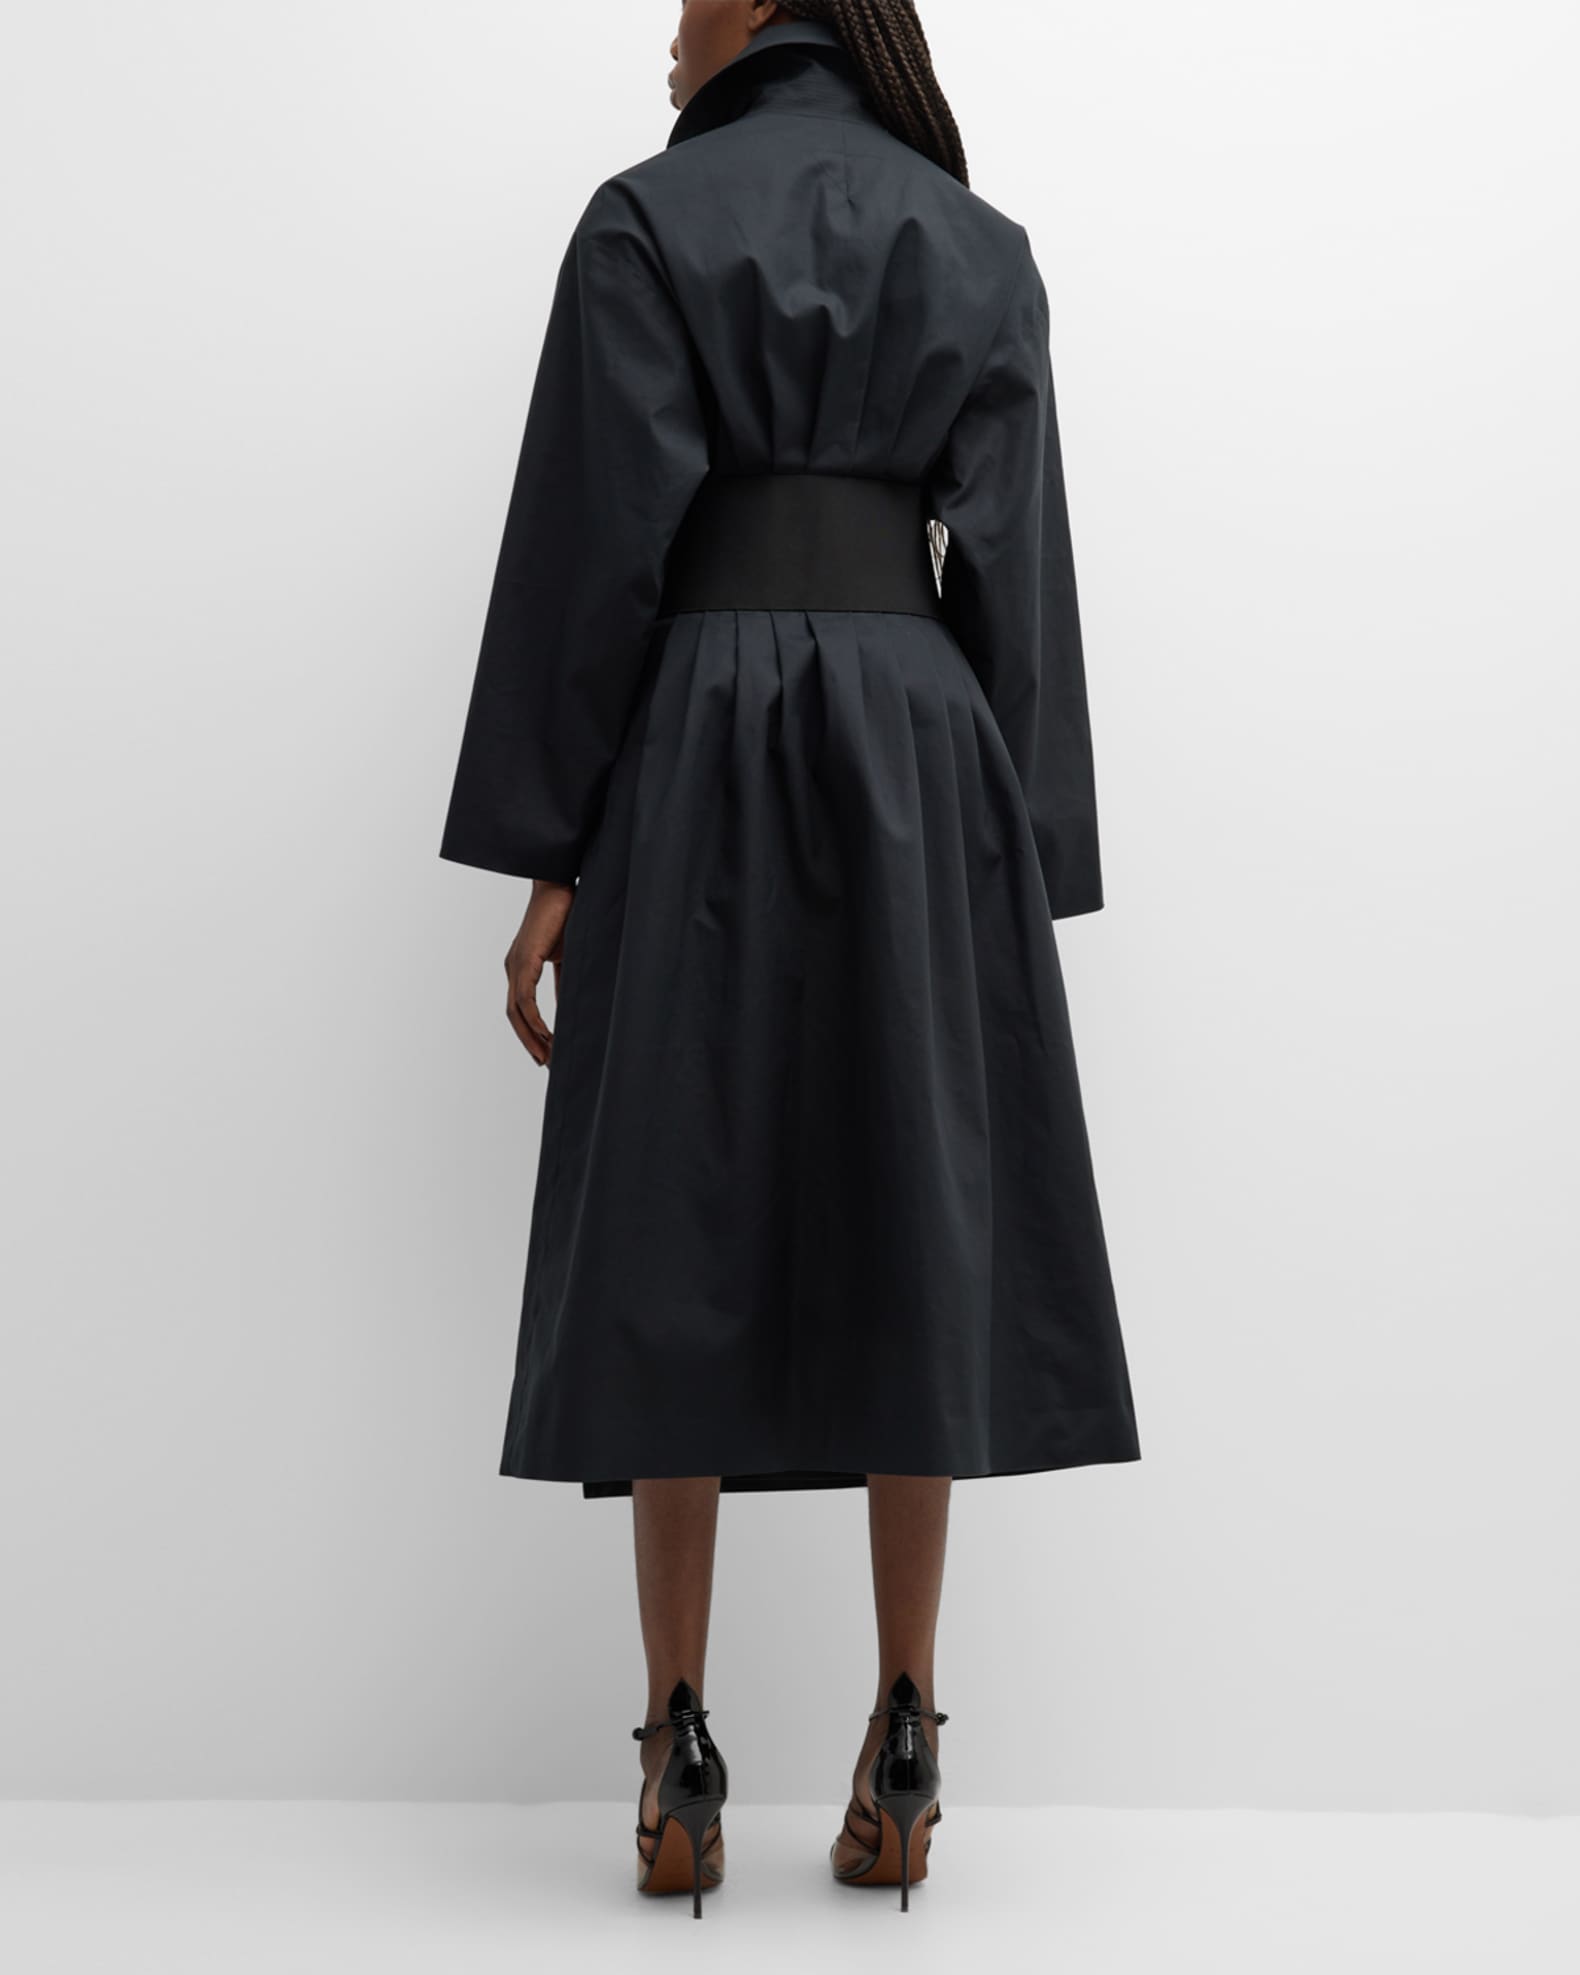 ALAIA Long Trench Coat with Leather Corset Belt | Neiman Marcus